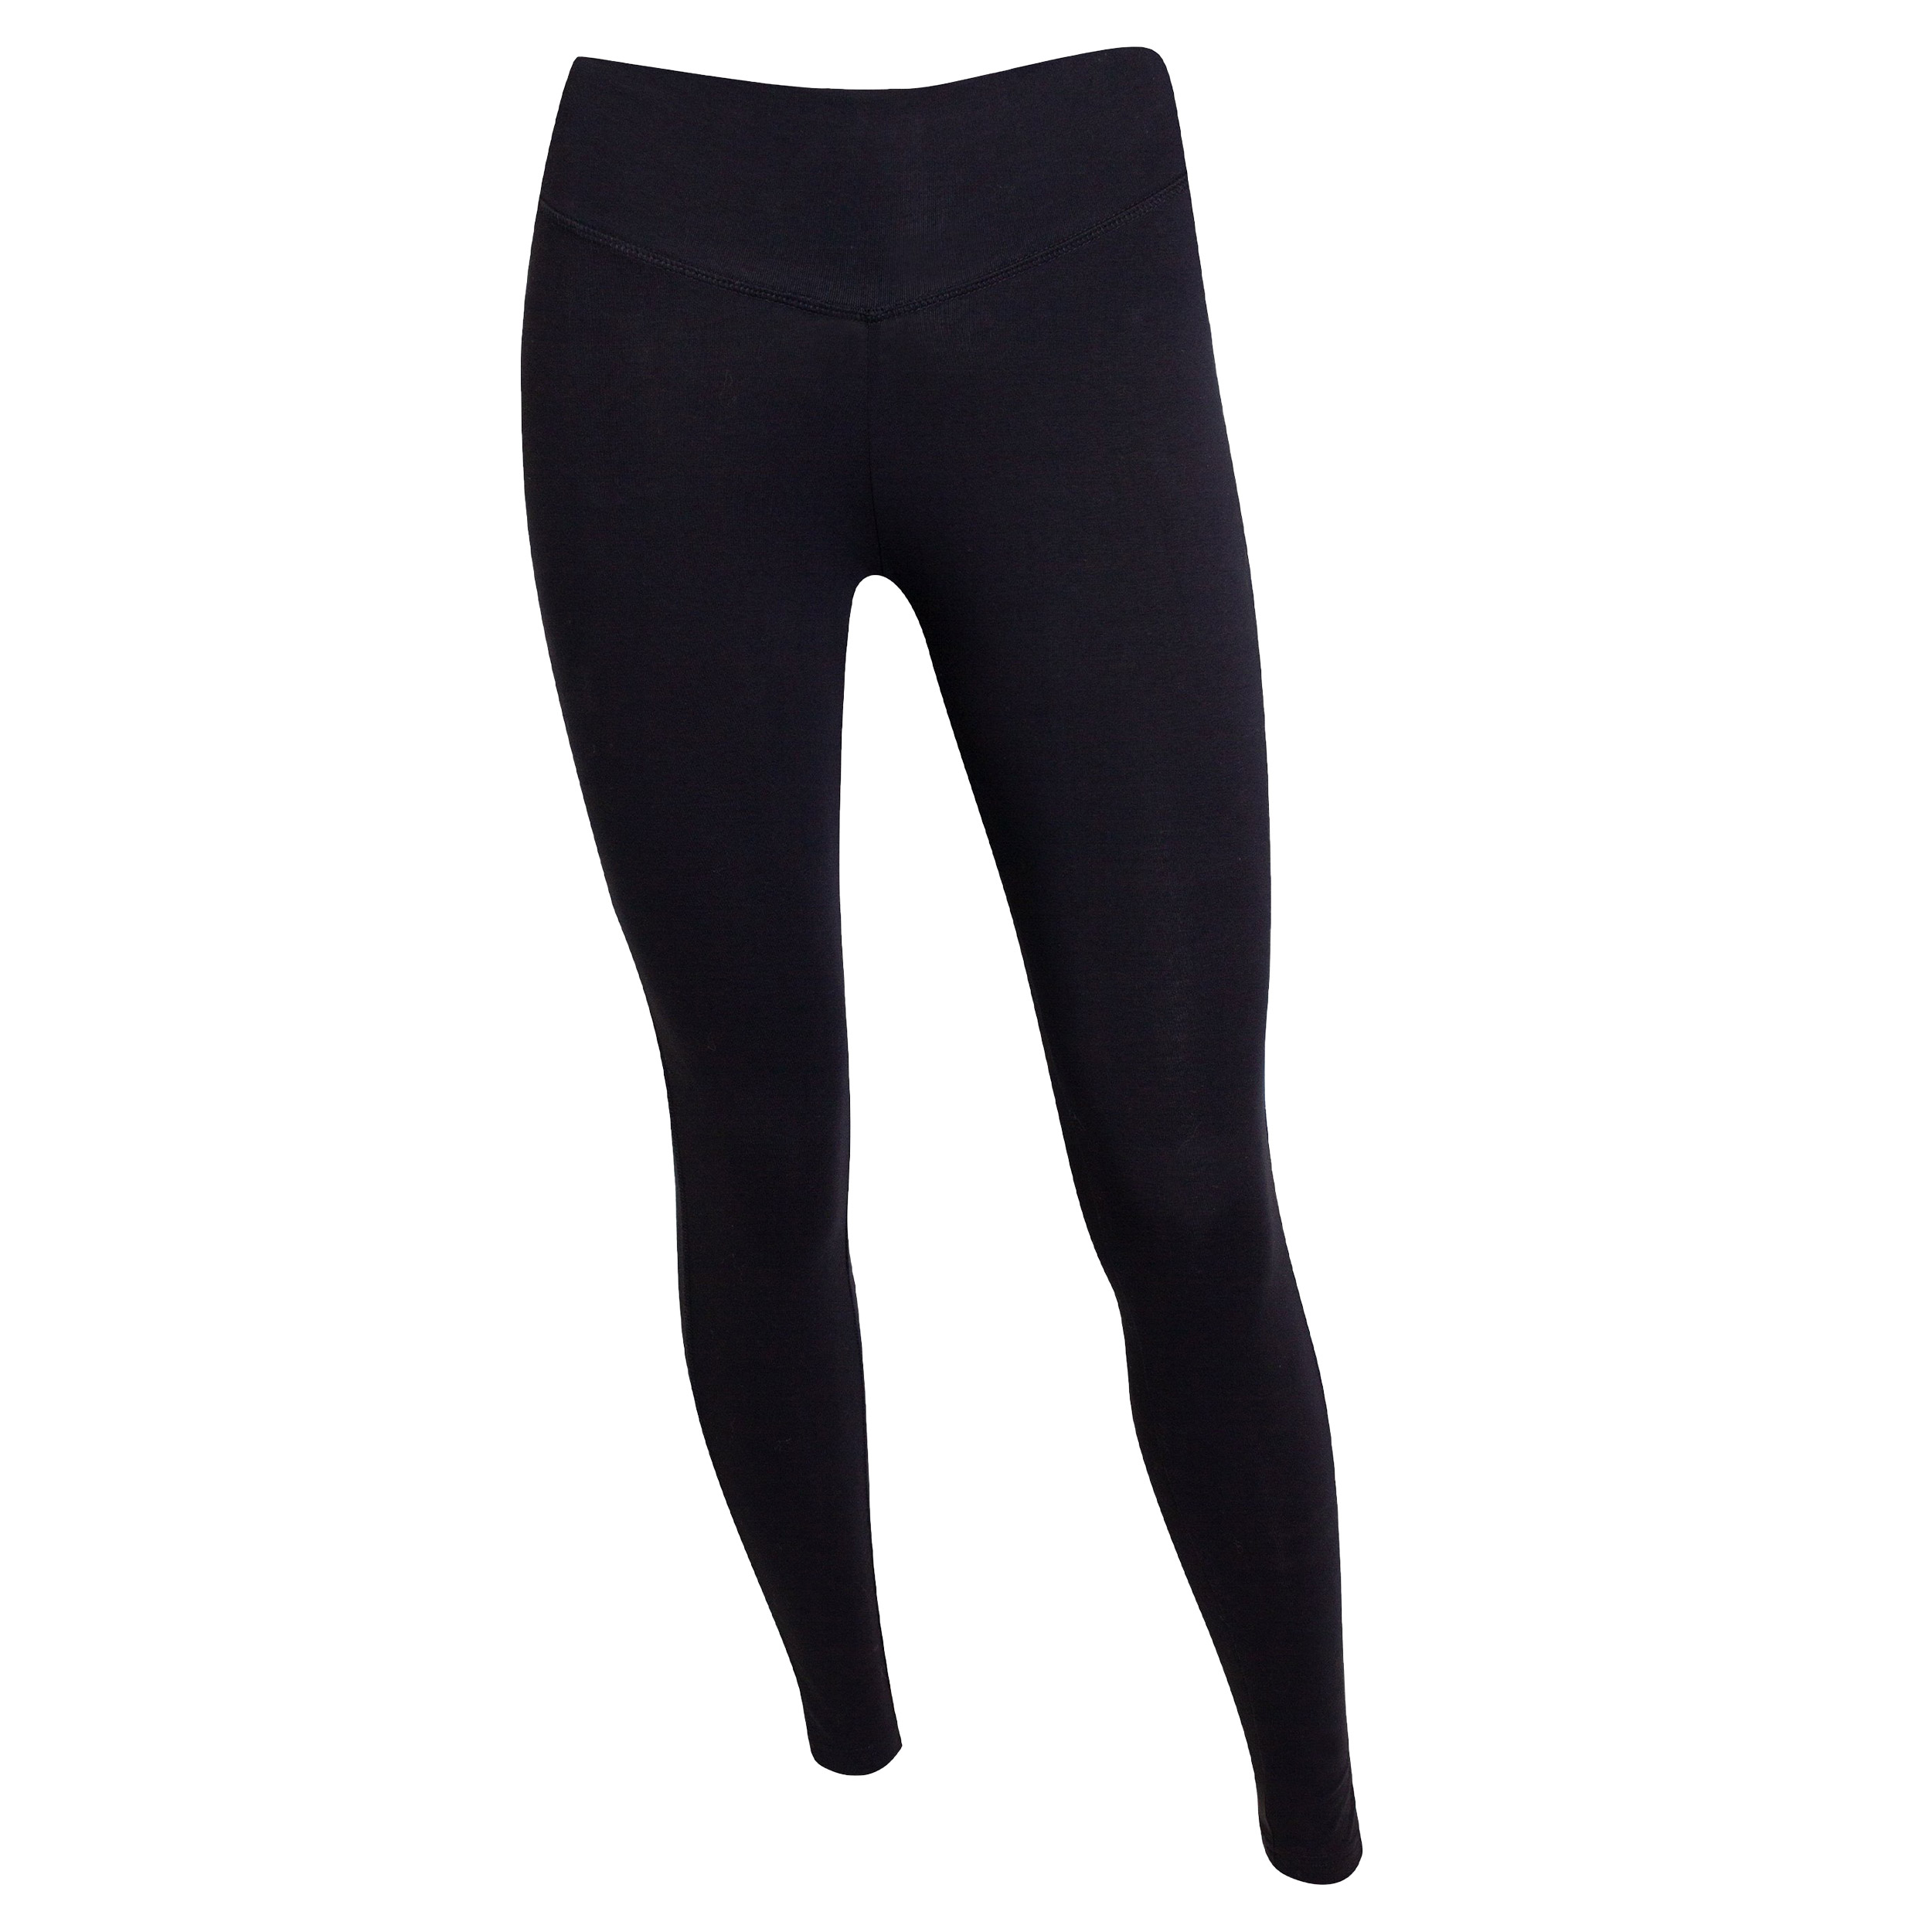 https://www.yogishop.com/out/pictures/master/product/1/basicleggings_black_front_web2500.jpg